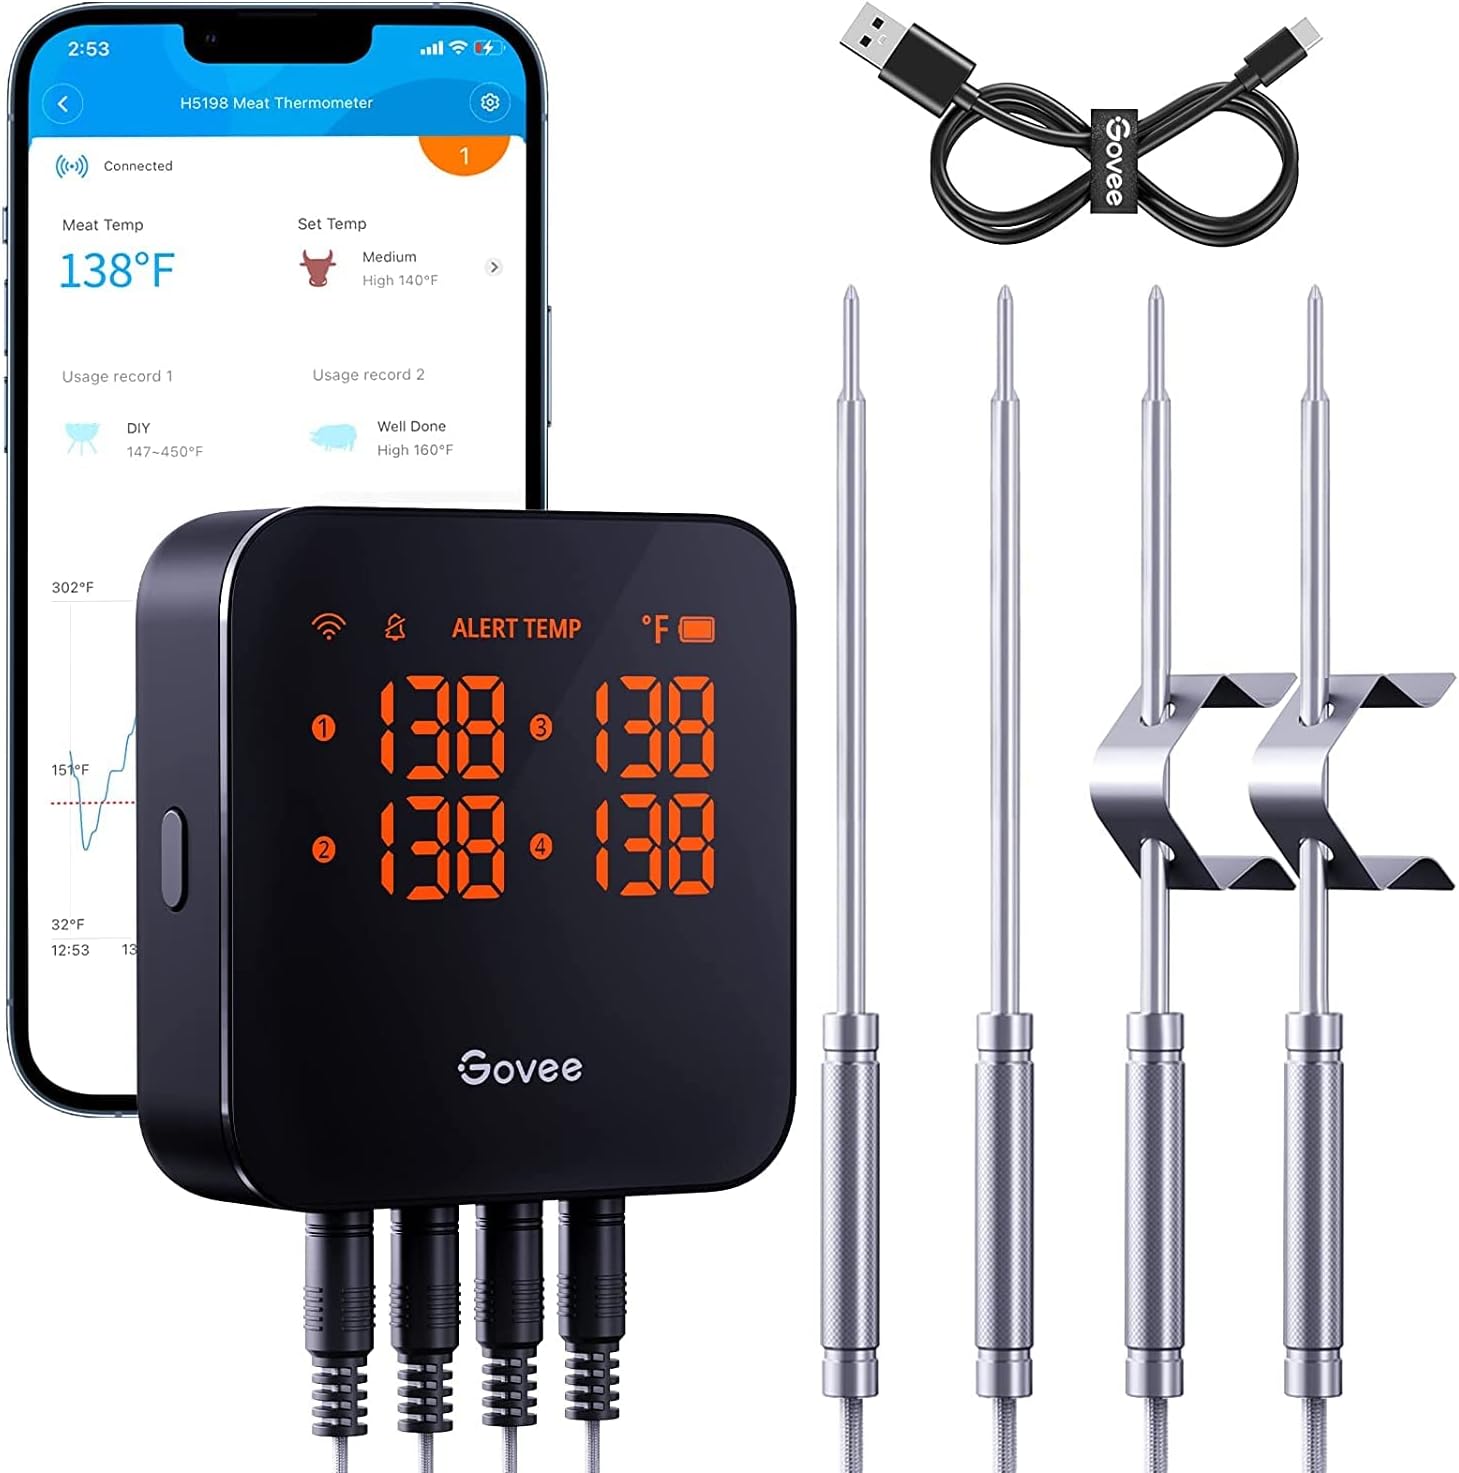 Govee WiFi Meat Thermometer, Wireless Meat Thermometer [...]